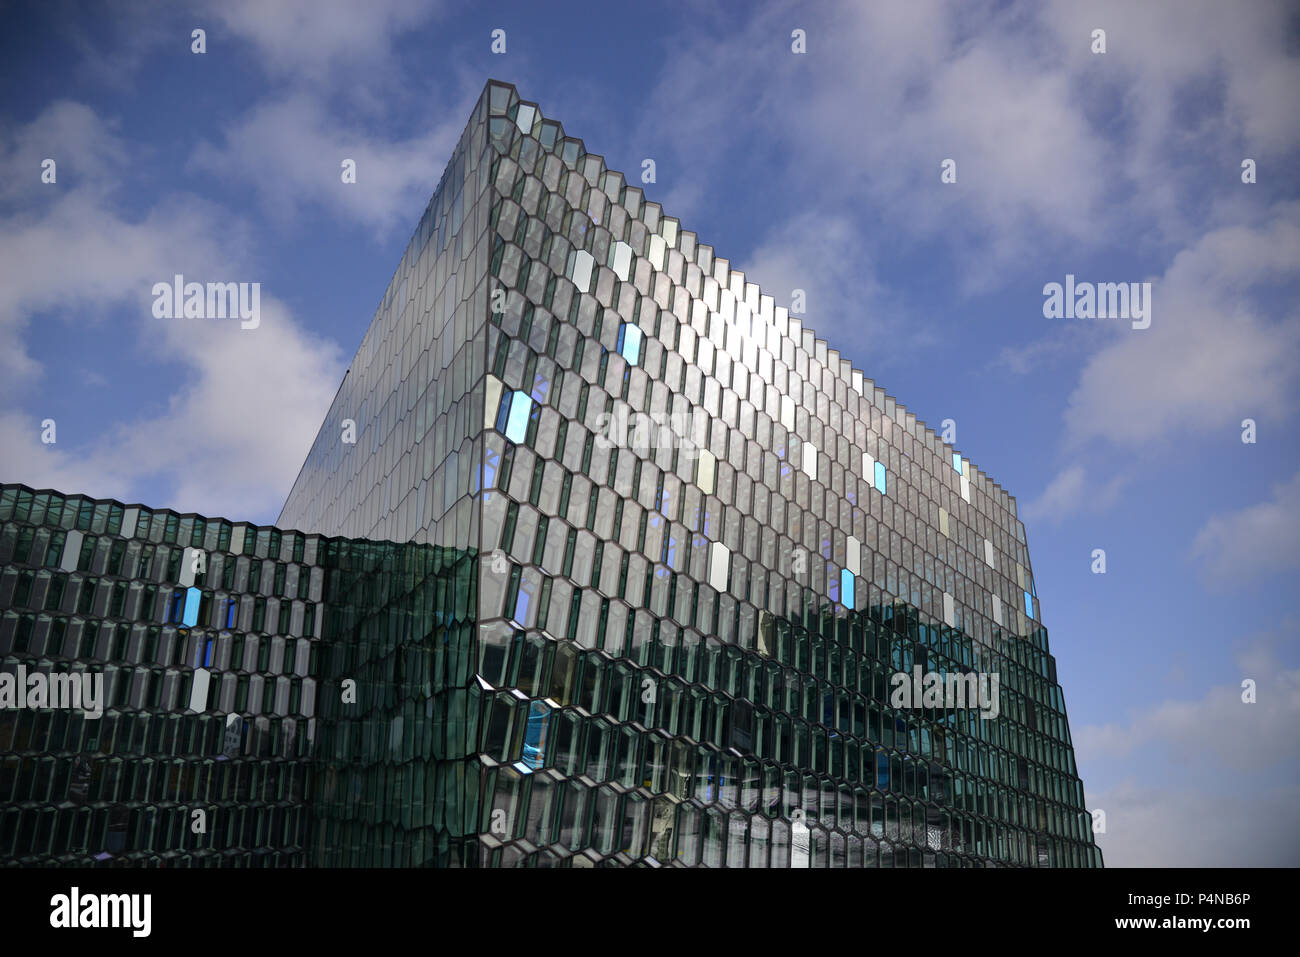 Sunlight reflecting in the glass panels of the famous Harpa concert hall in Reykjavik, Iceland Stock Photo